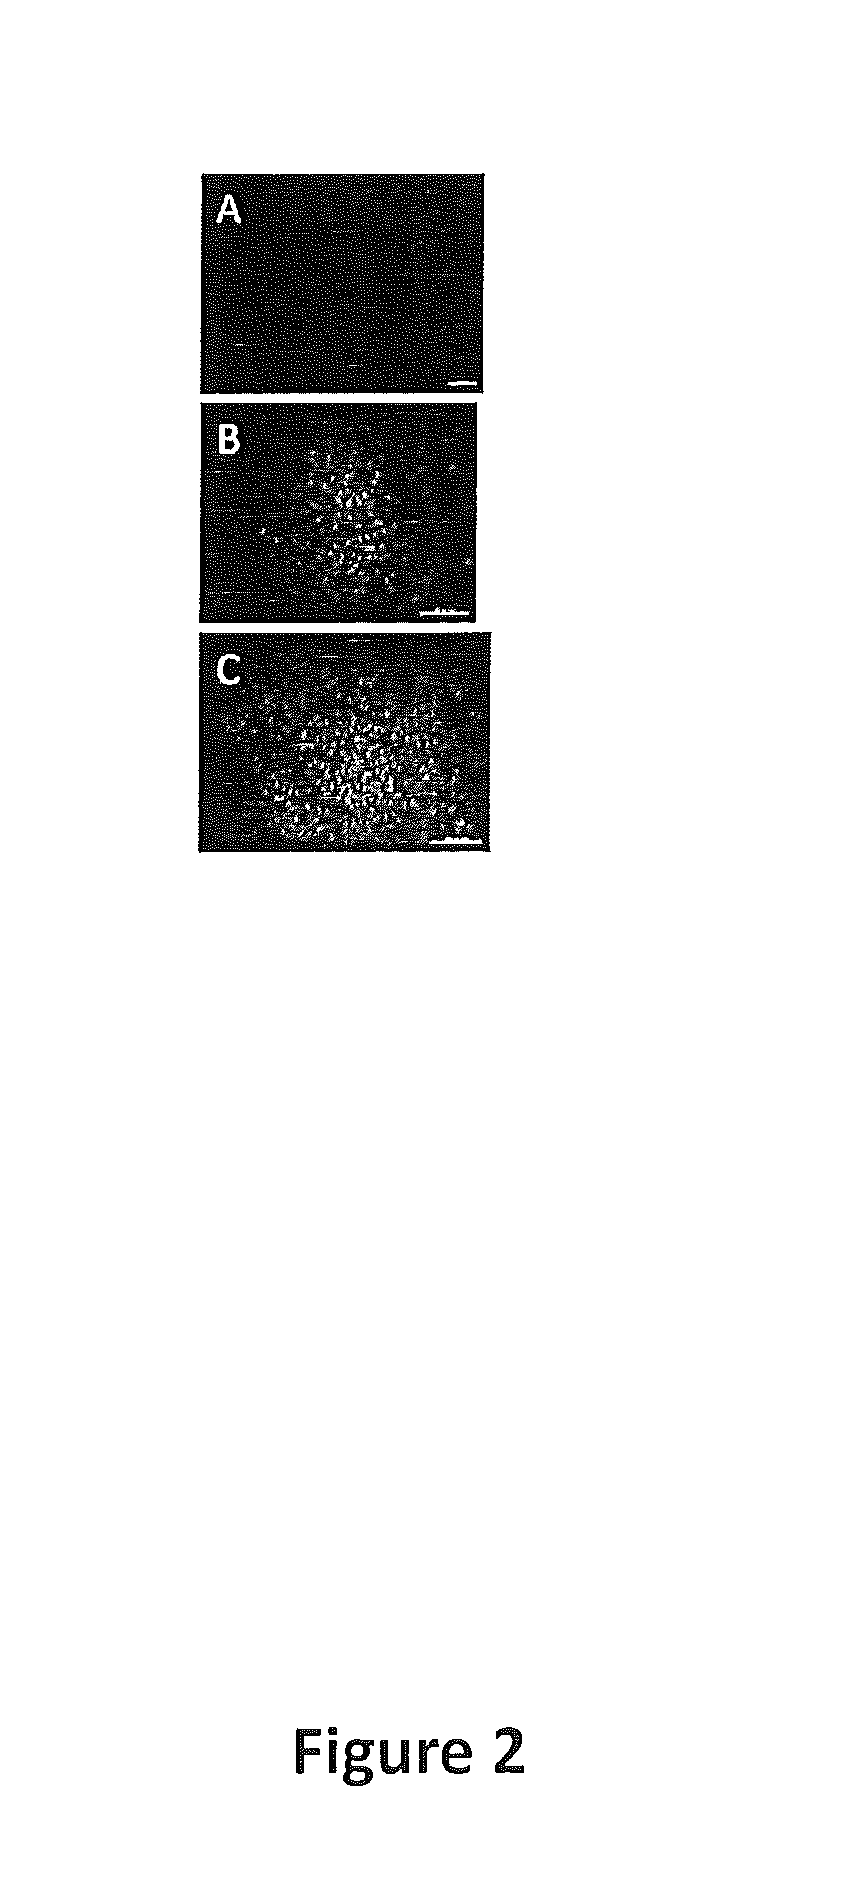 Tissue-specific extracellular matrix with or without tissue protein components for cell culture